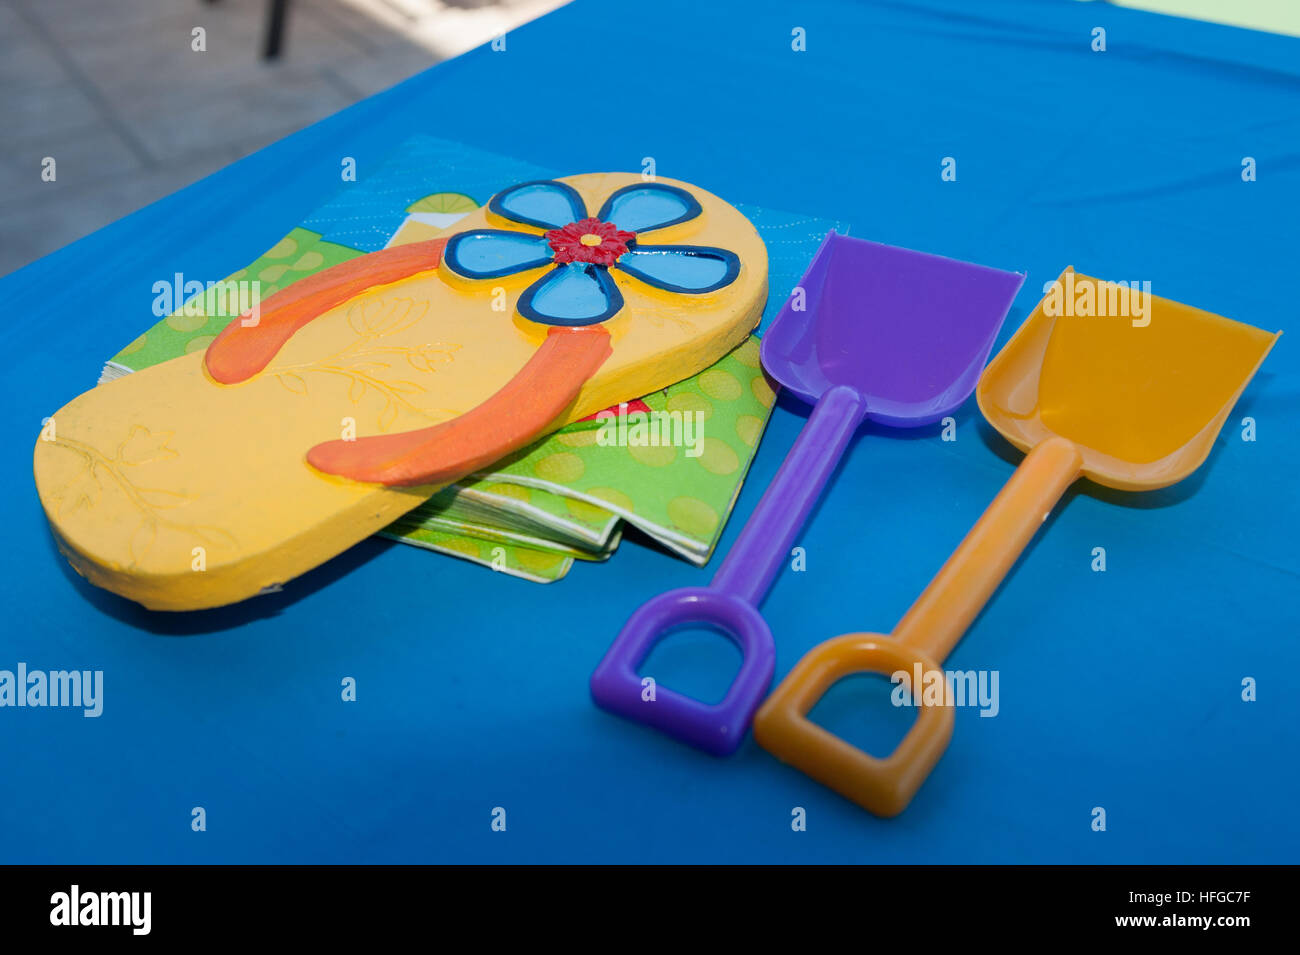 Beach Themed Party Decorations On Table Stock Photo 130053267 Alamy